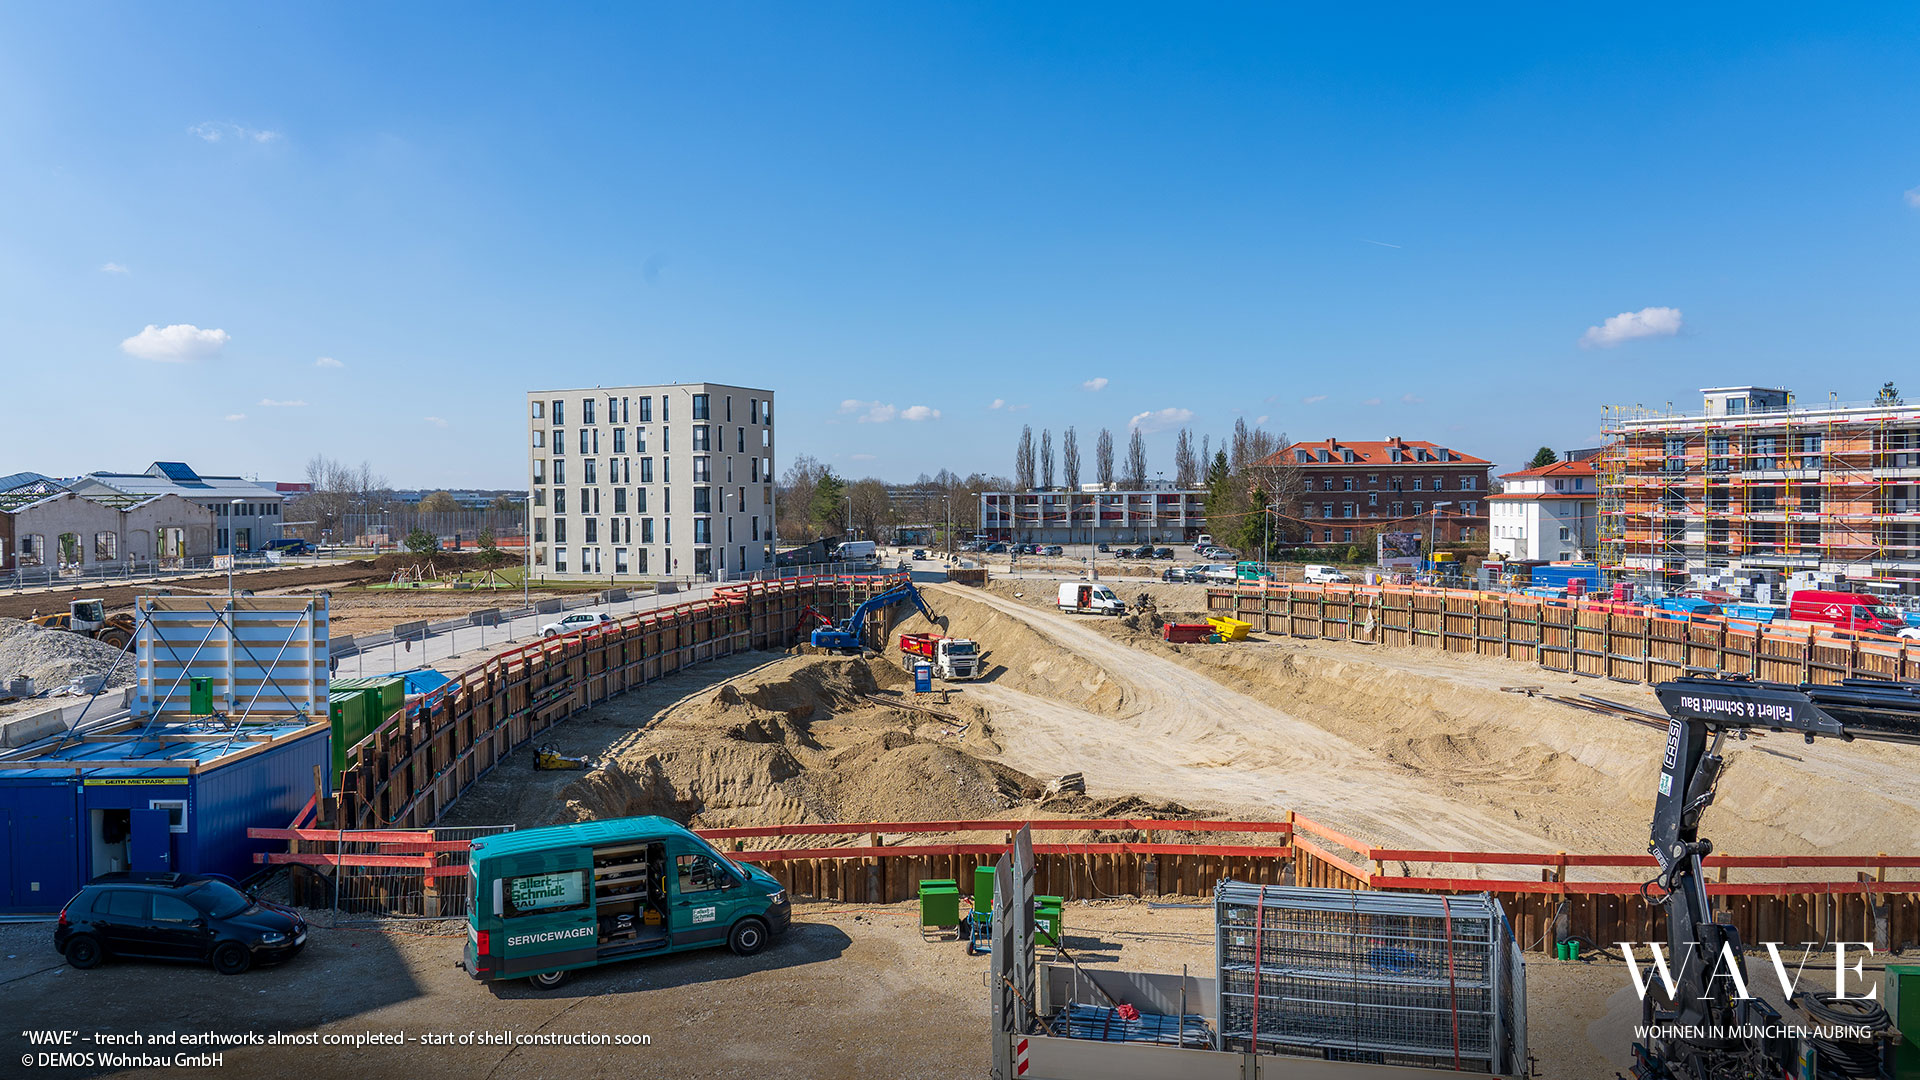 'WAVE' in Munich-Aubing: Shoring and earthworks will soon be completed-carcass work to begin shortly